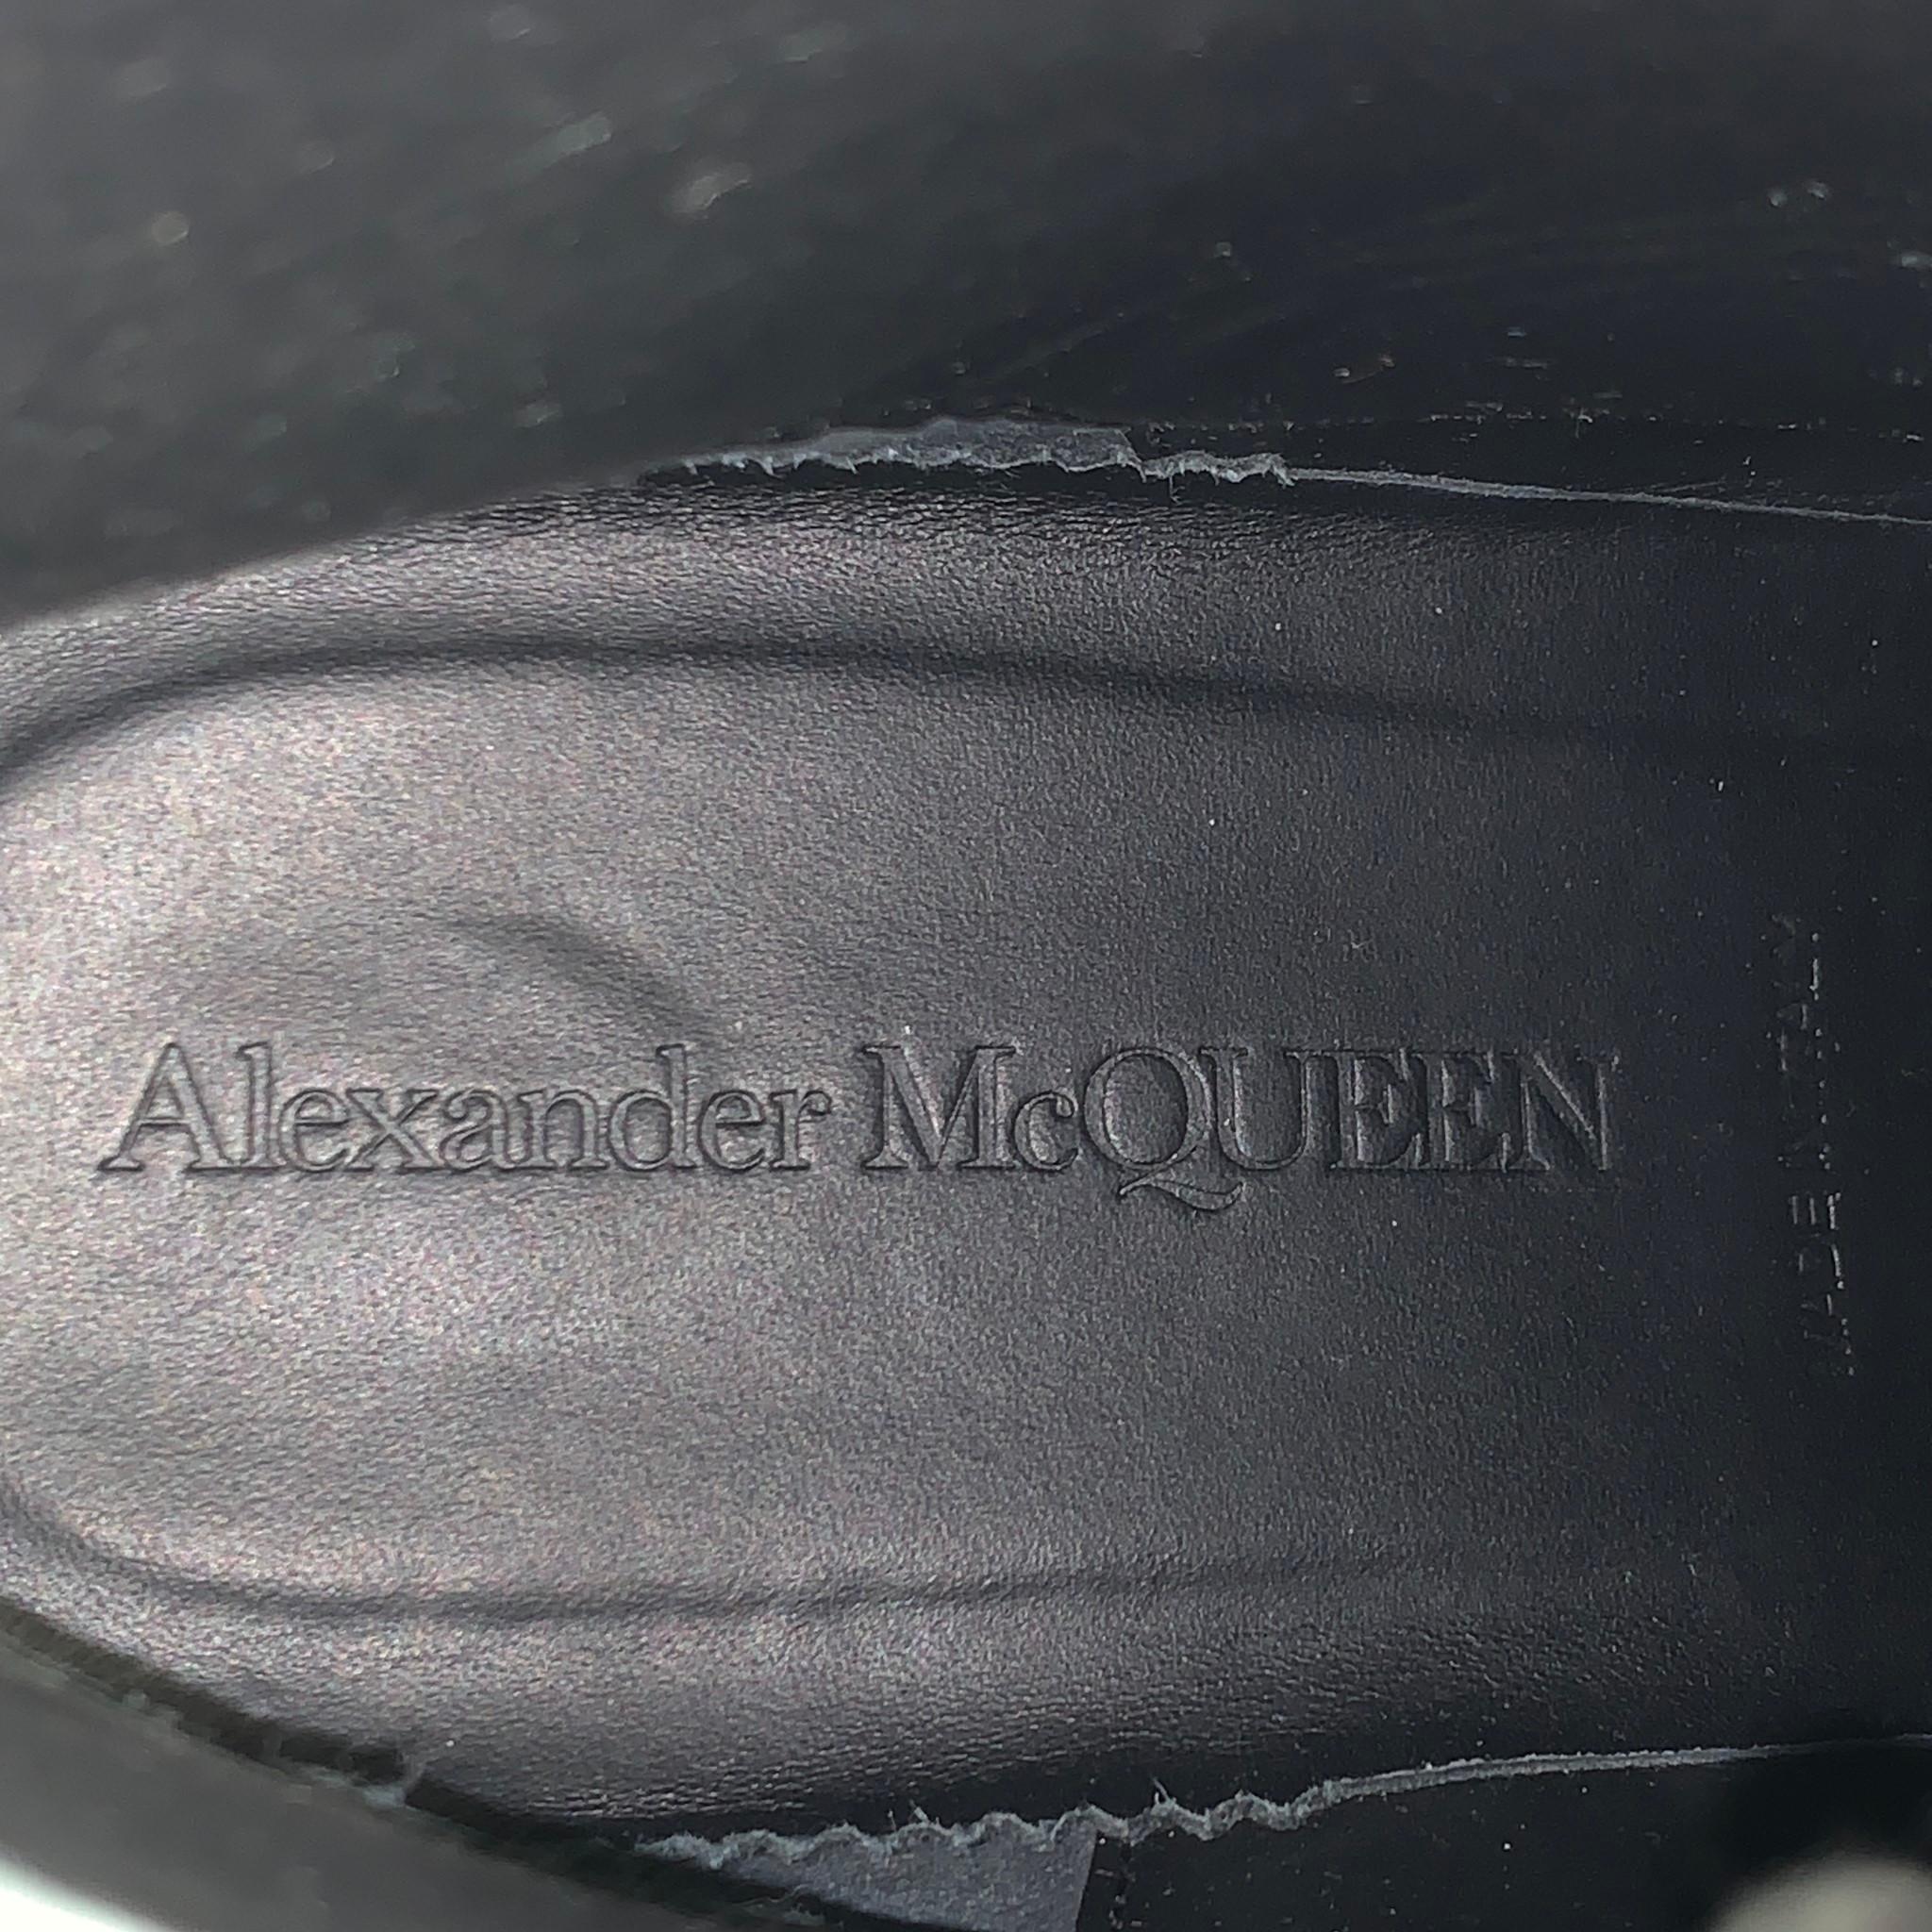 ALEXANDER MCQUEEN Size 11 Black Contrast Stitch Leather Lace Up Boots 1